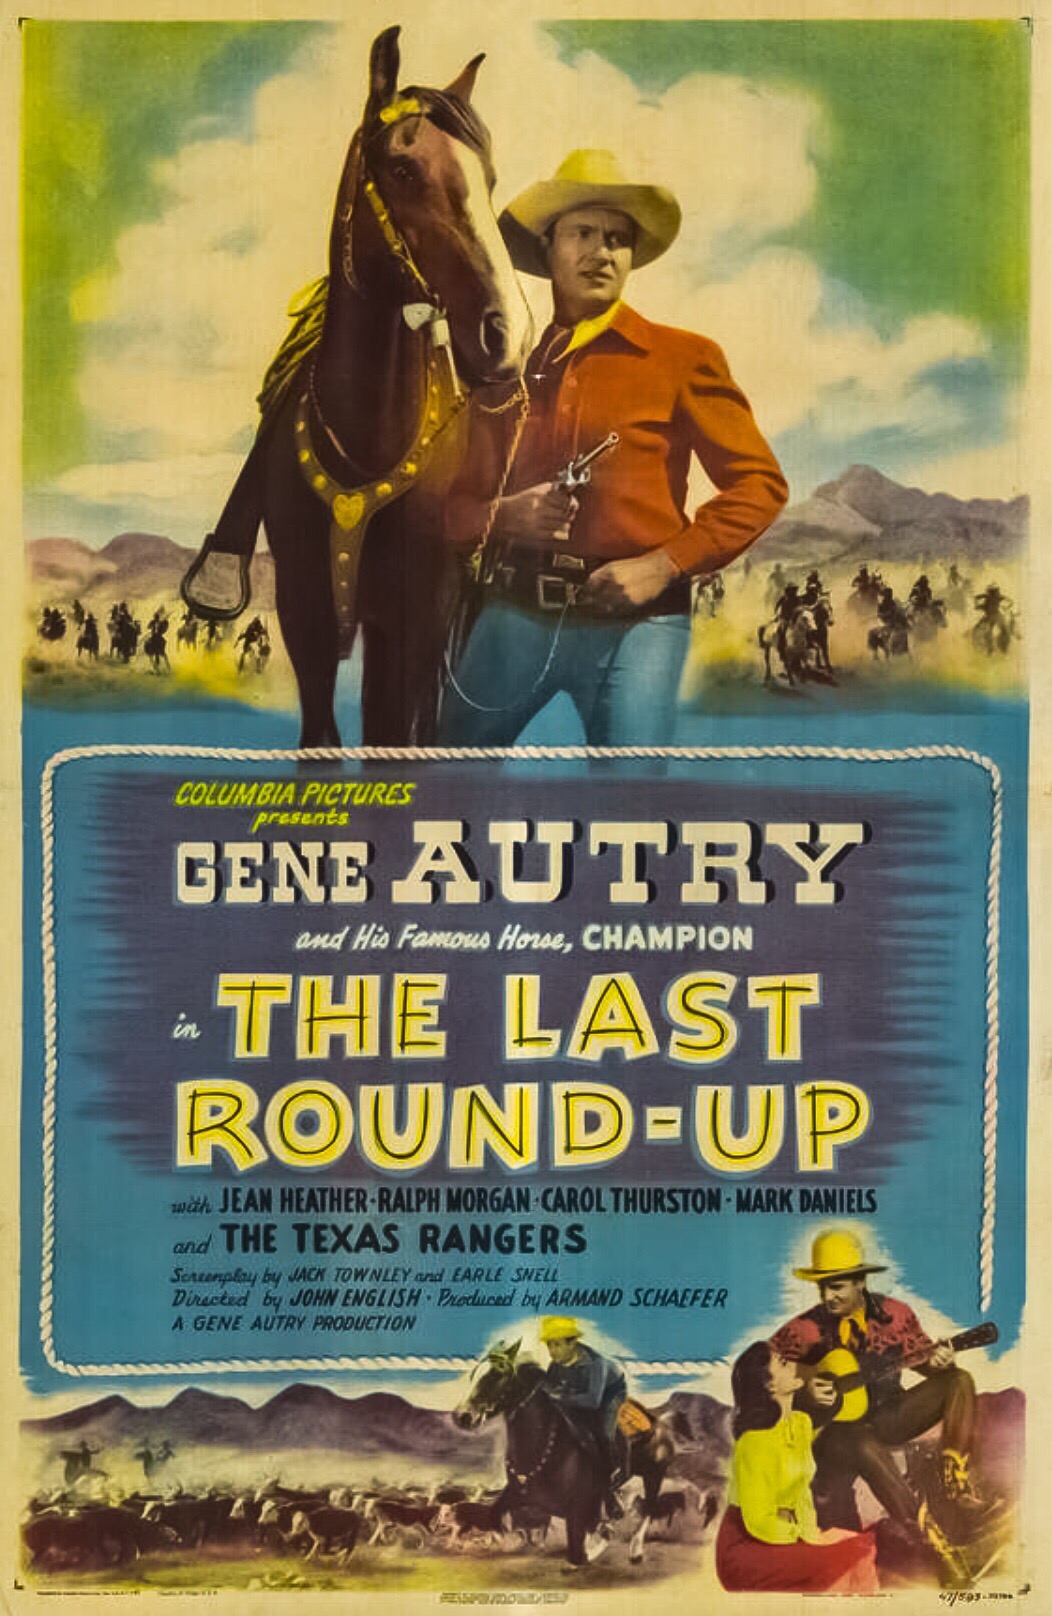 The Last Round-up (1947) starring Gene Autry on DVD on DVD